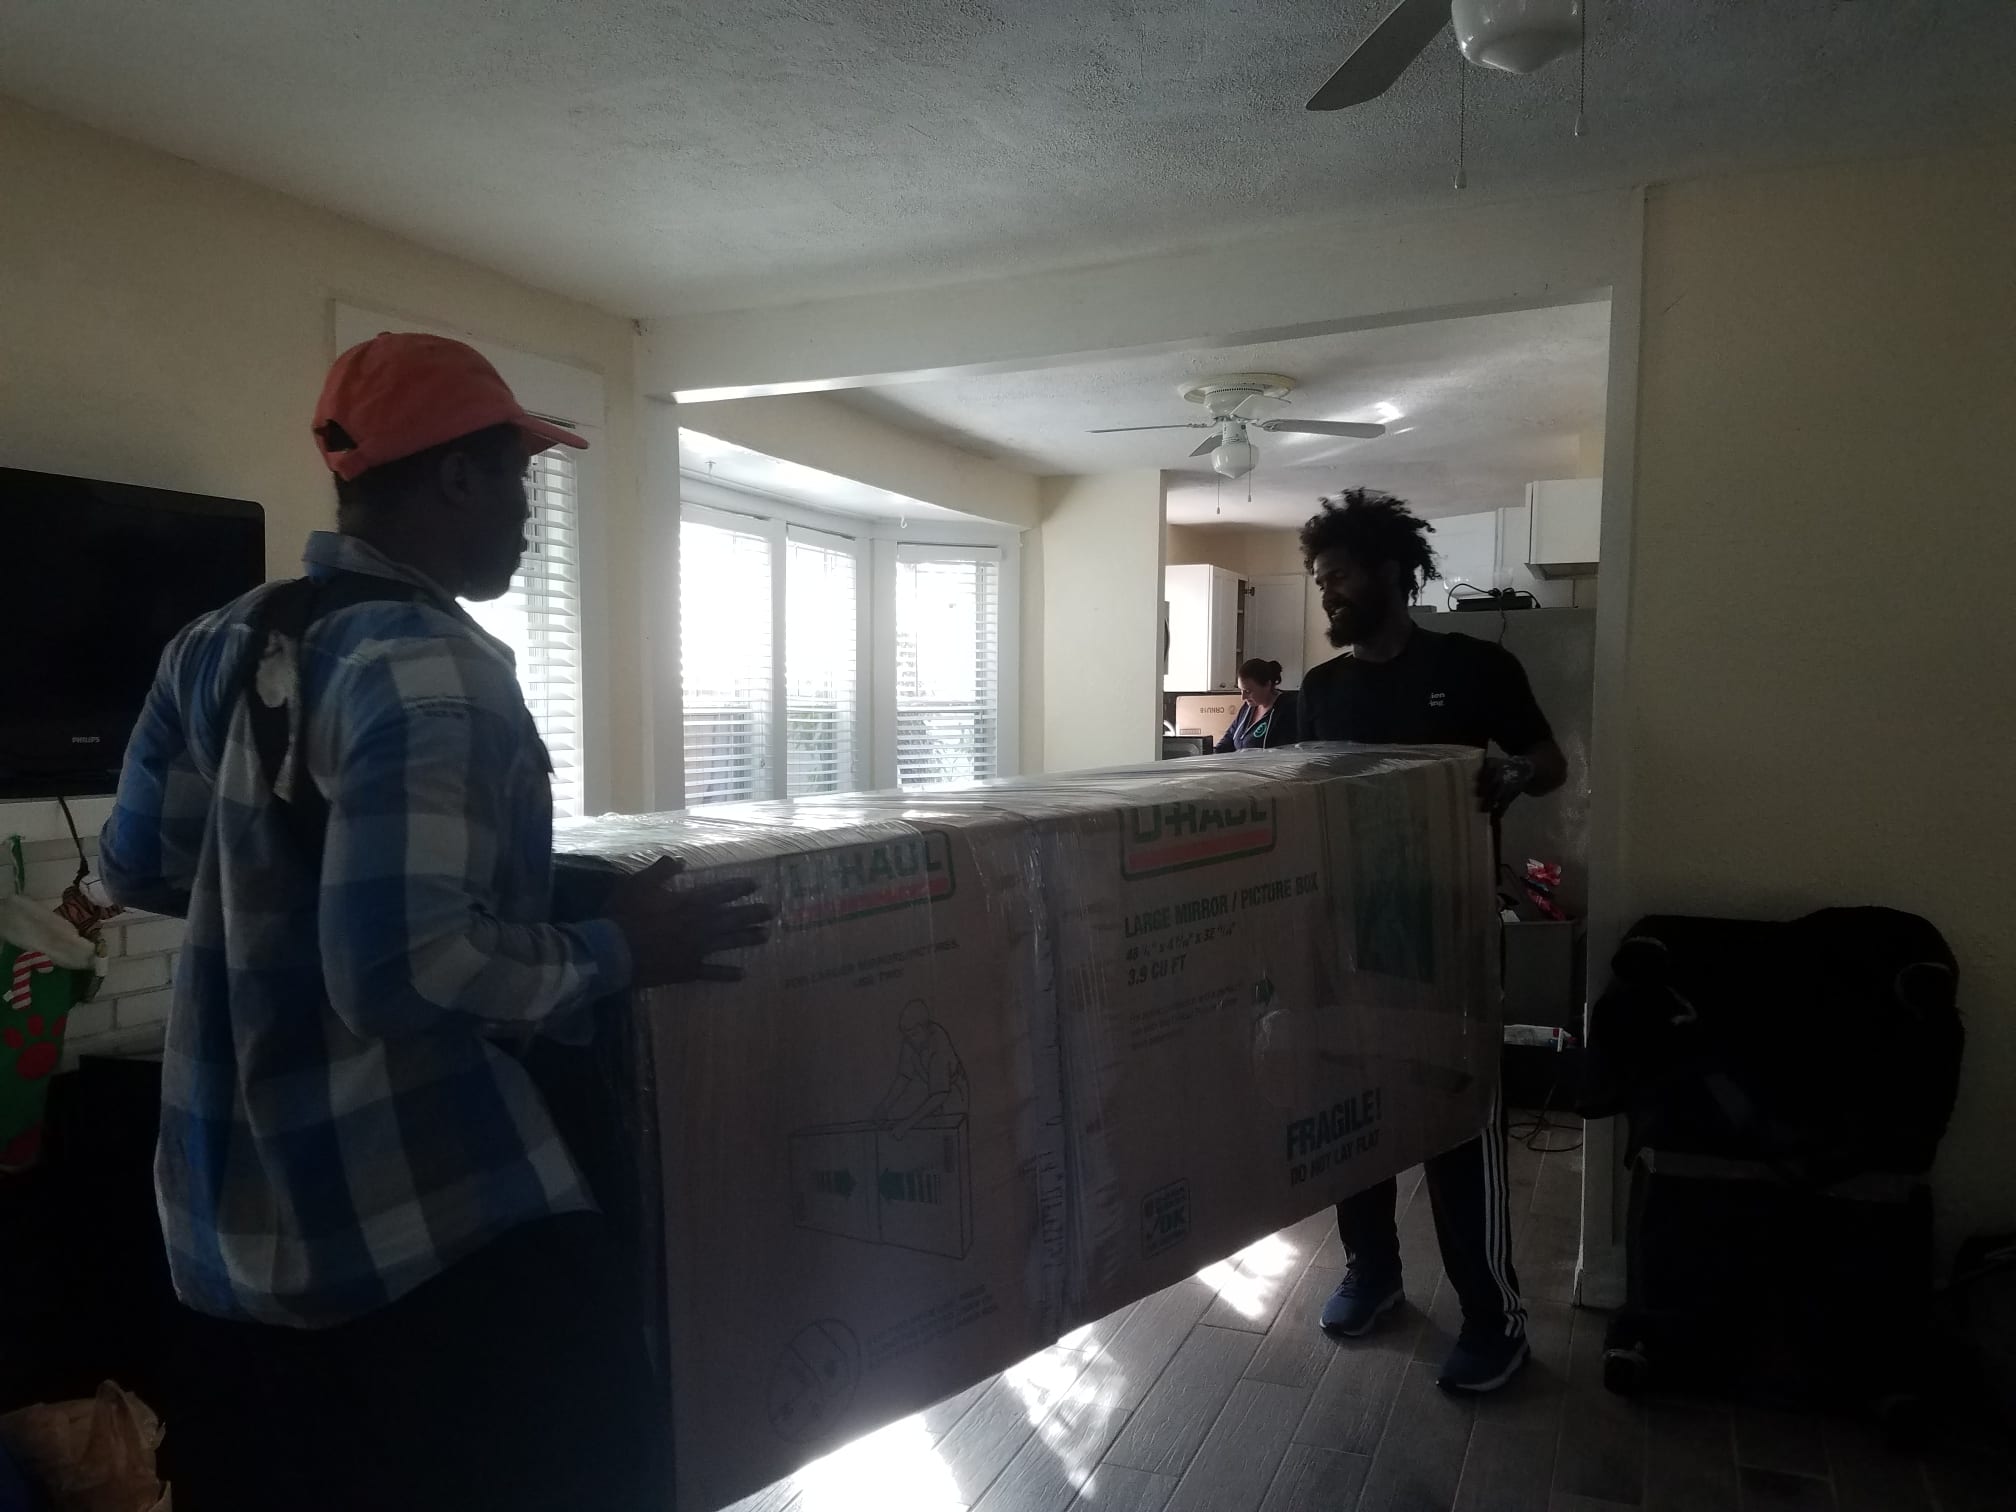 Best hot tub movers in Central FL